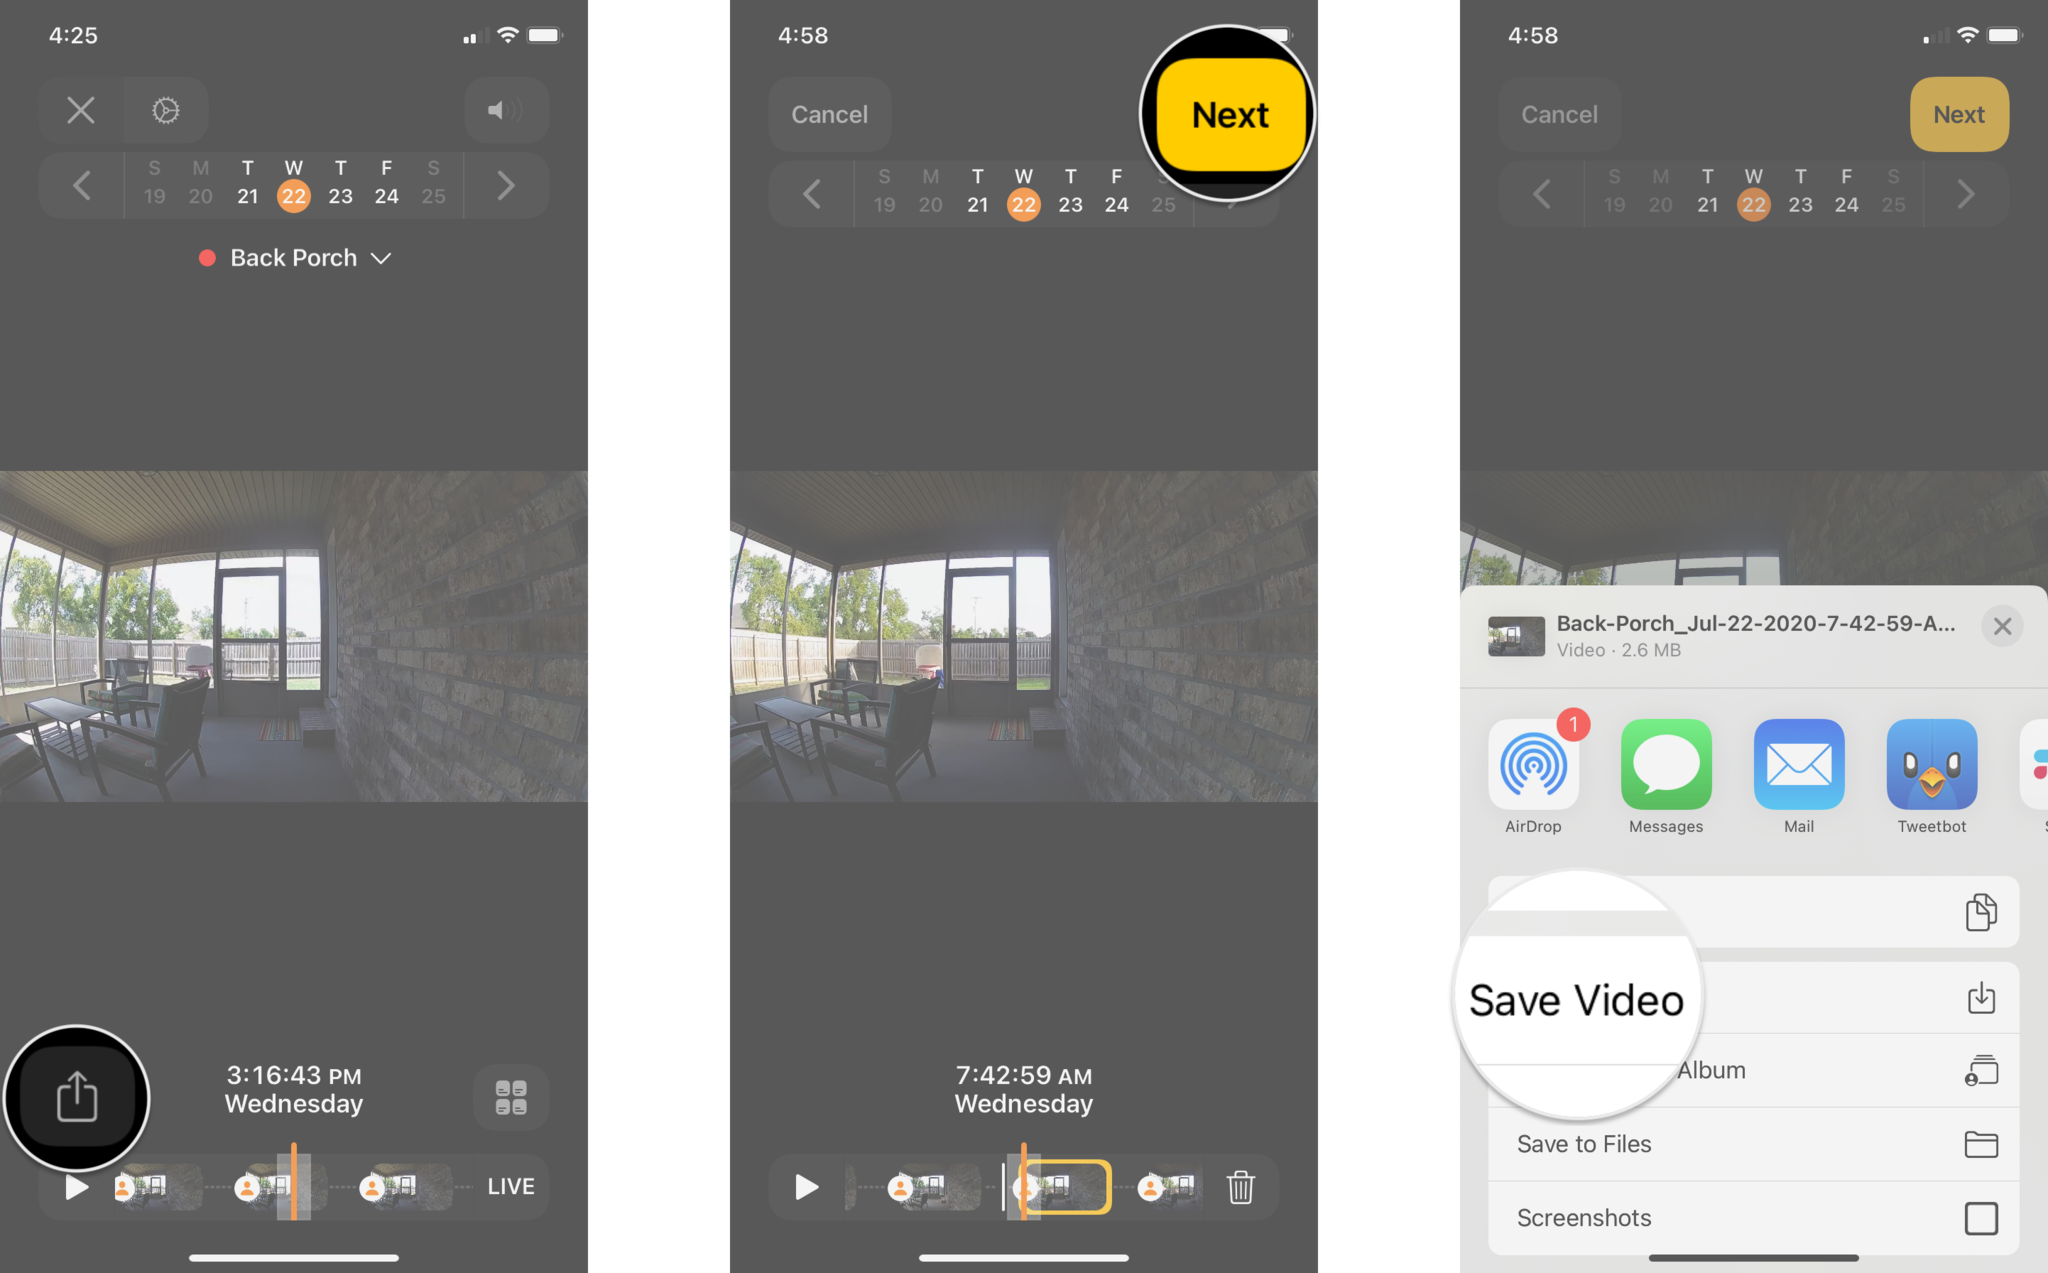 How to save recorded video in the Home app on the iPhone by showing steps: Tap on the Share icon, Tap Next, Tap Save Video